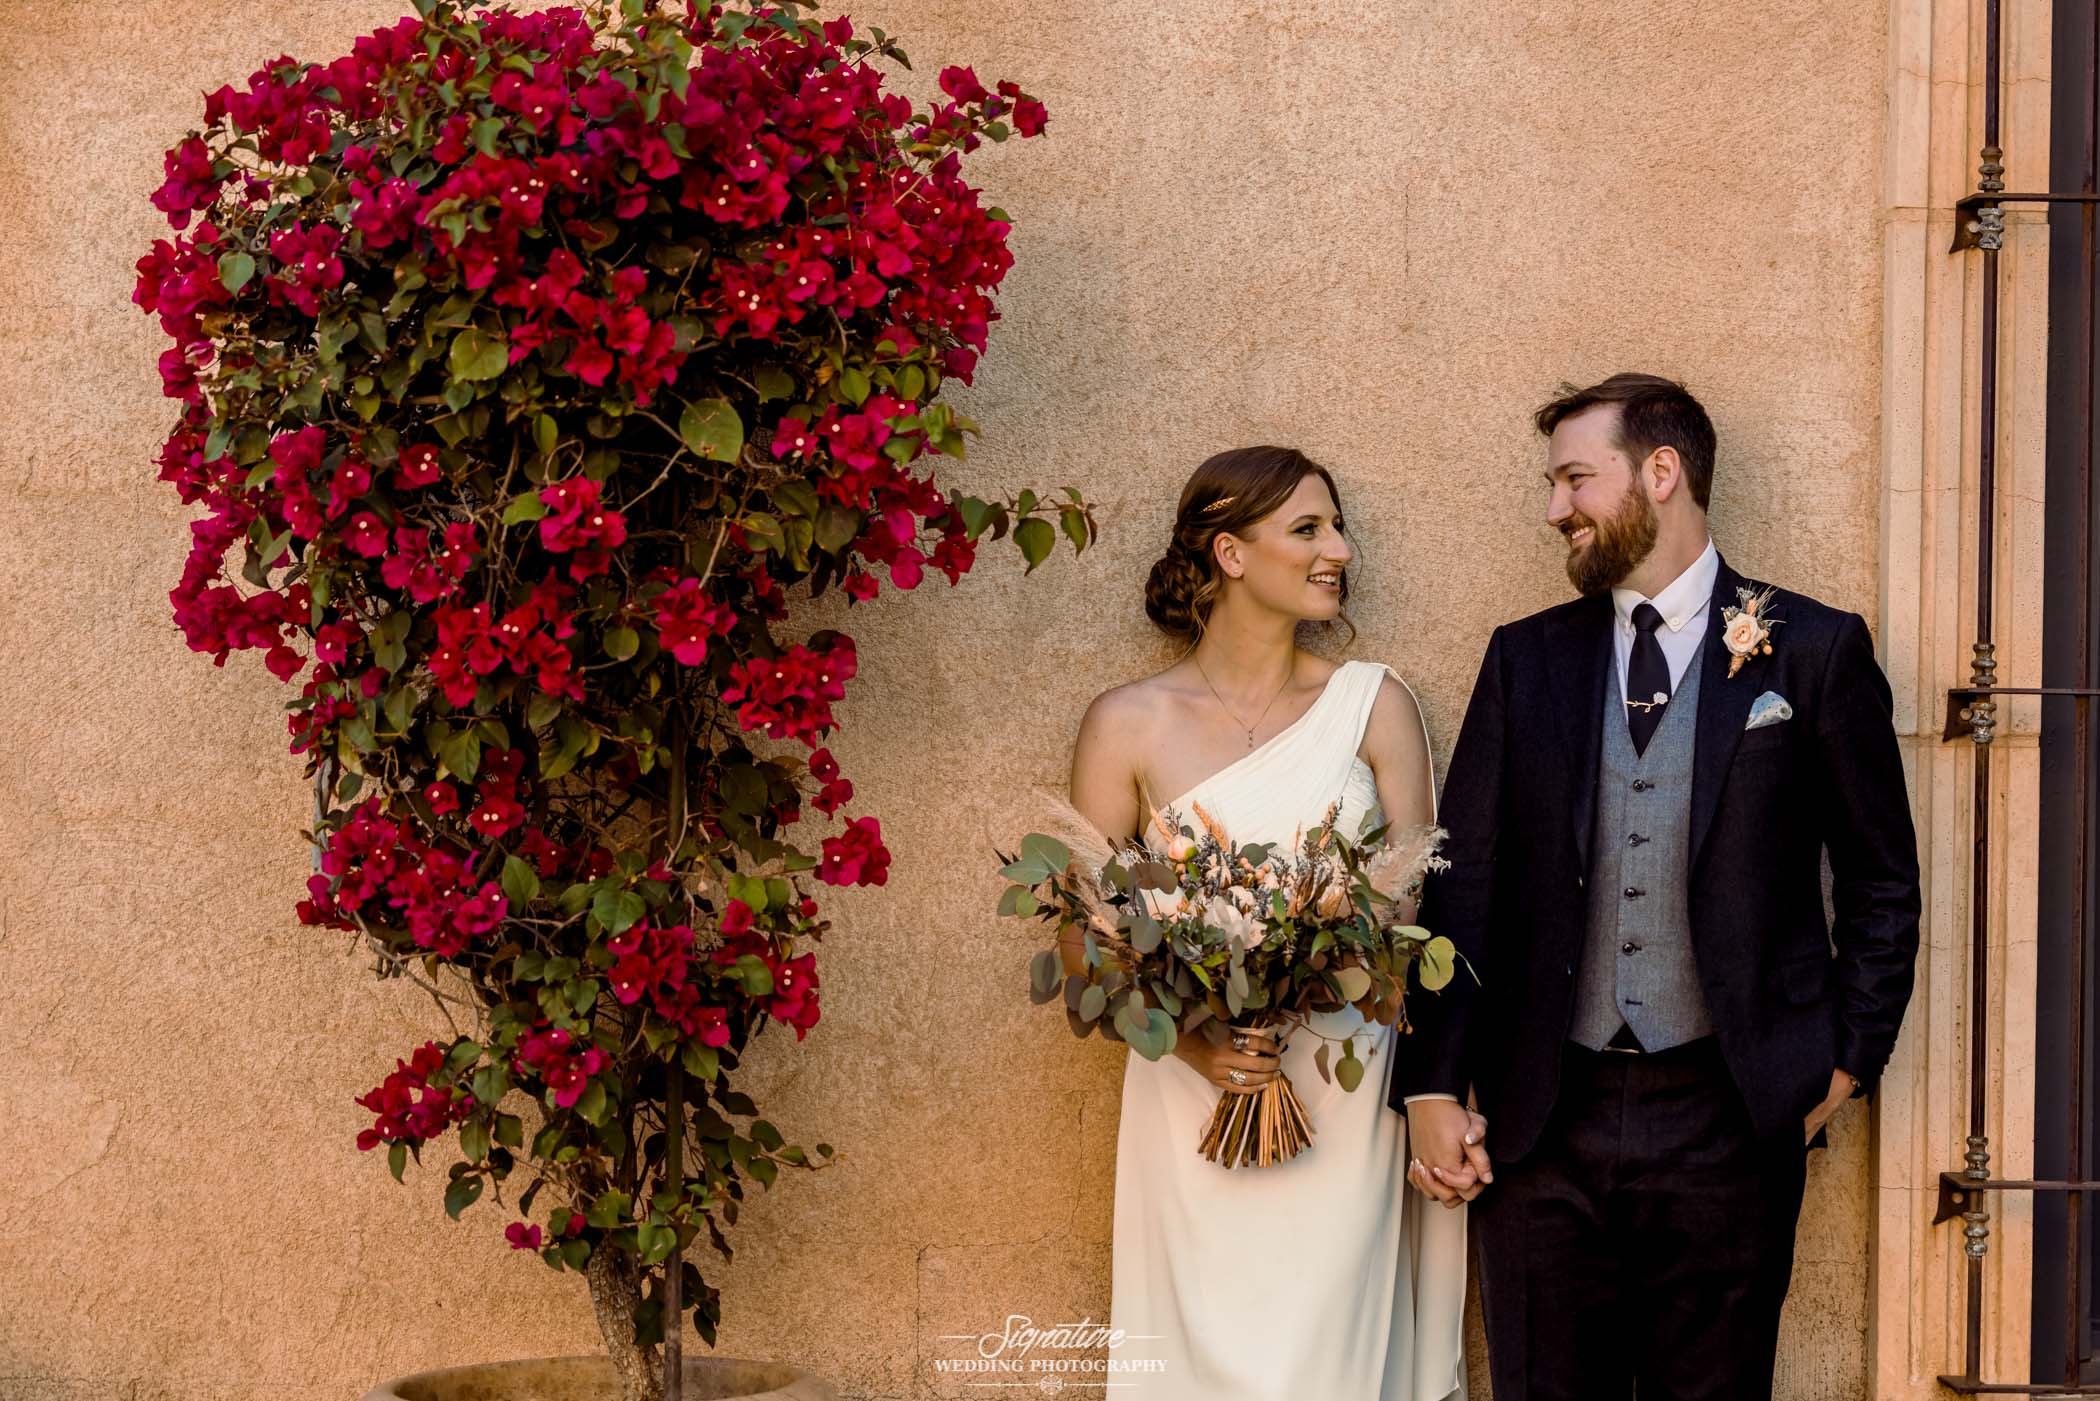 Bride and groom next to flowers smiling at each other